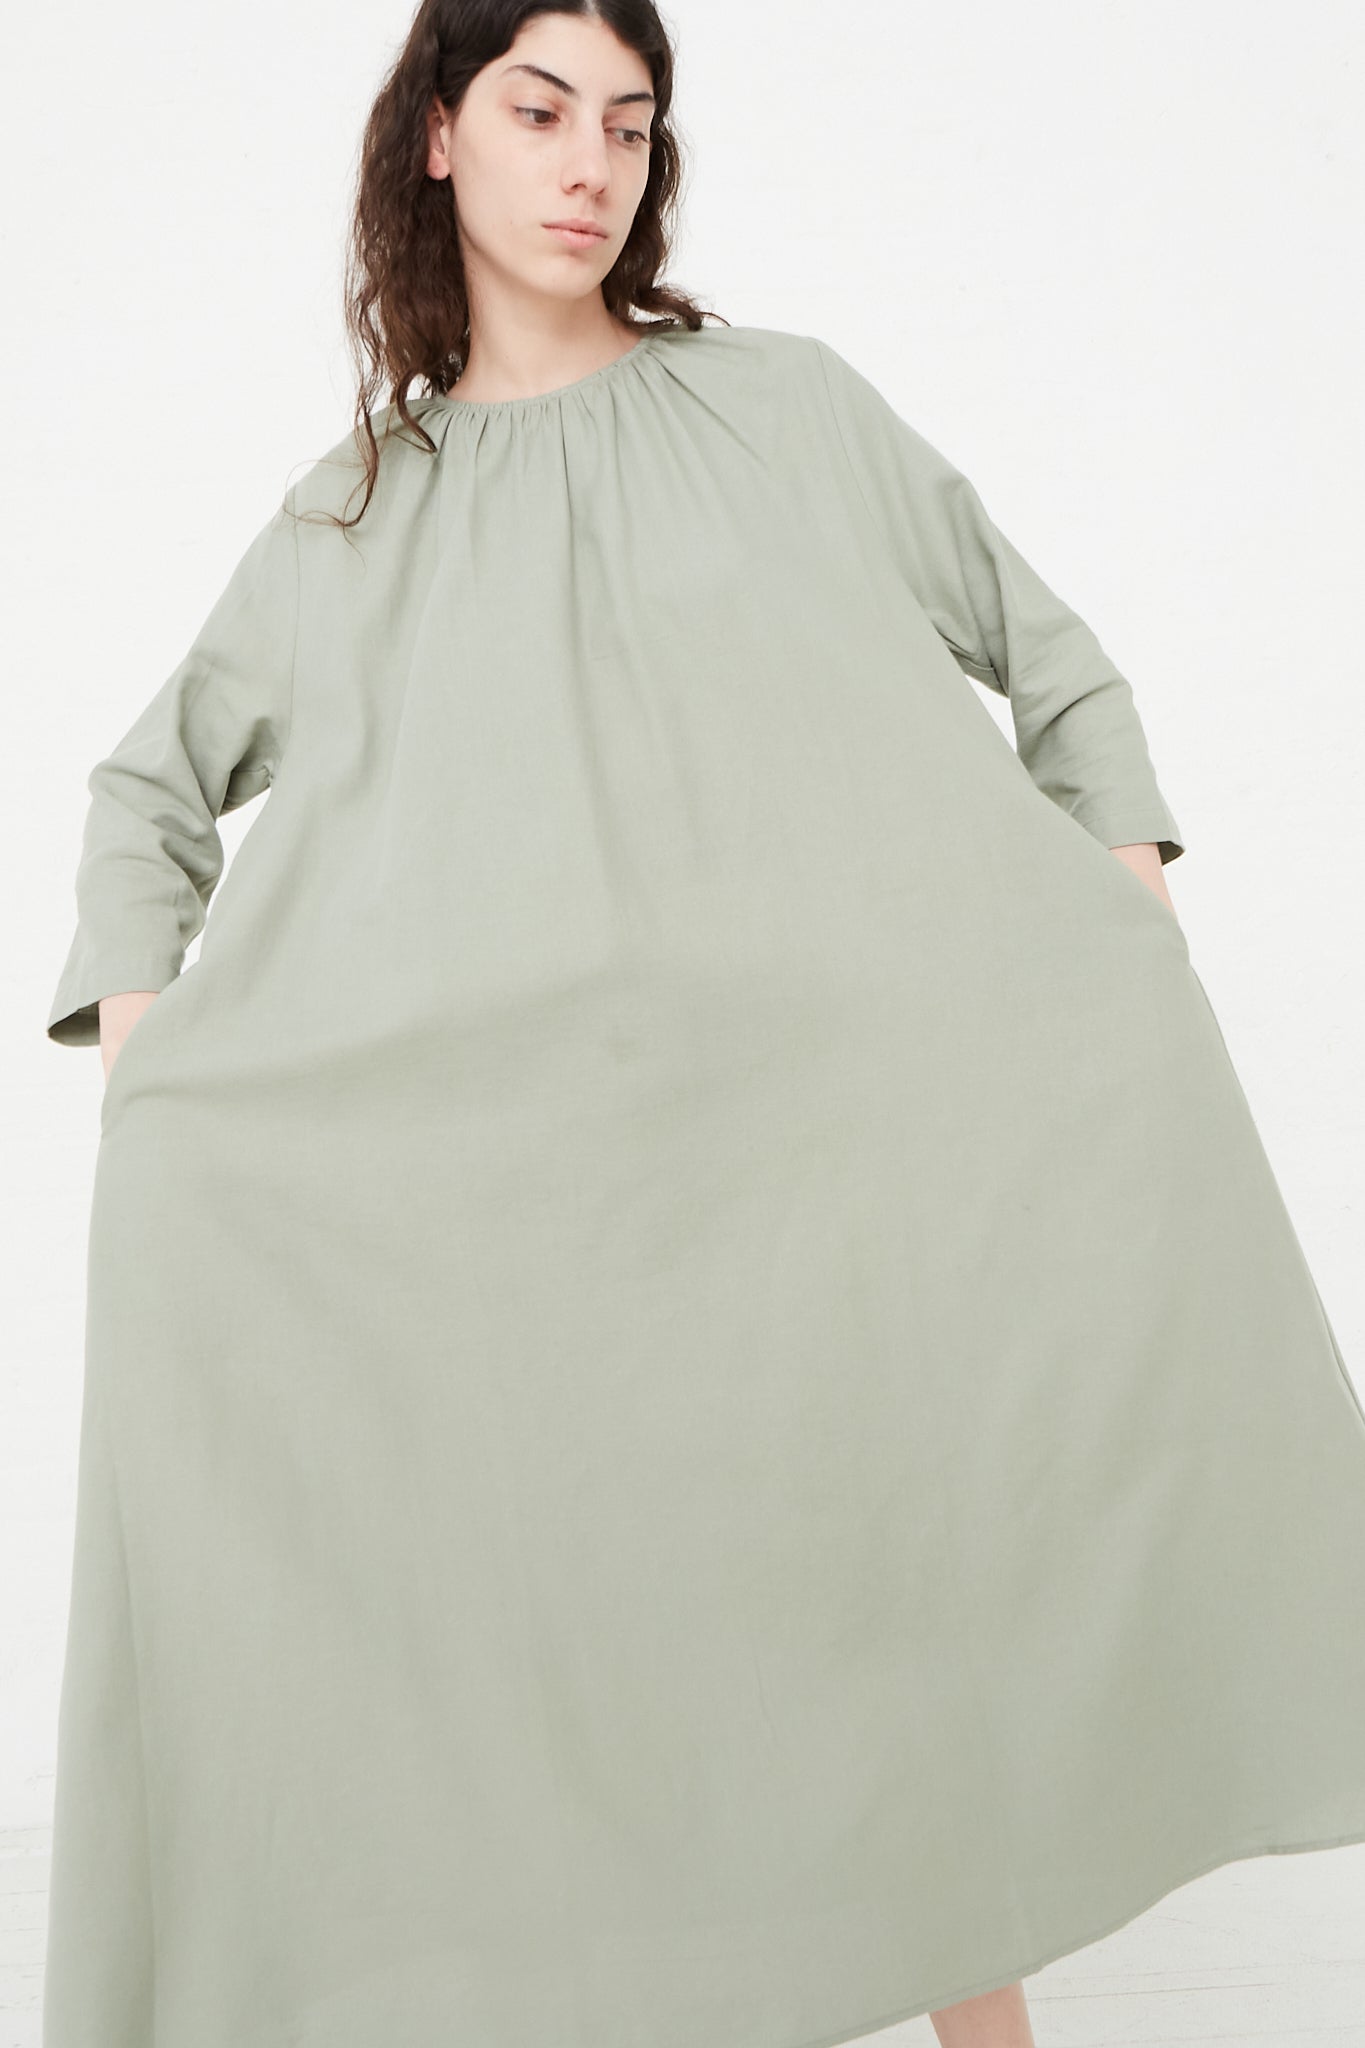 The model is wearing a sage green Cotton Twill Shirred Neck Dress in Agave by Black Crane. Front view. Model's hands are in pockets.